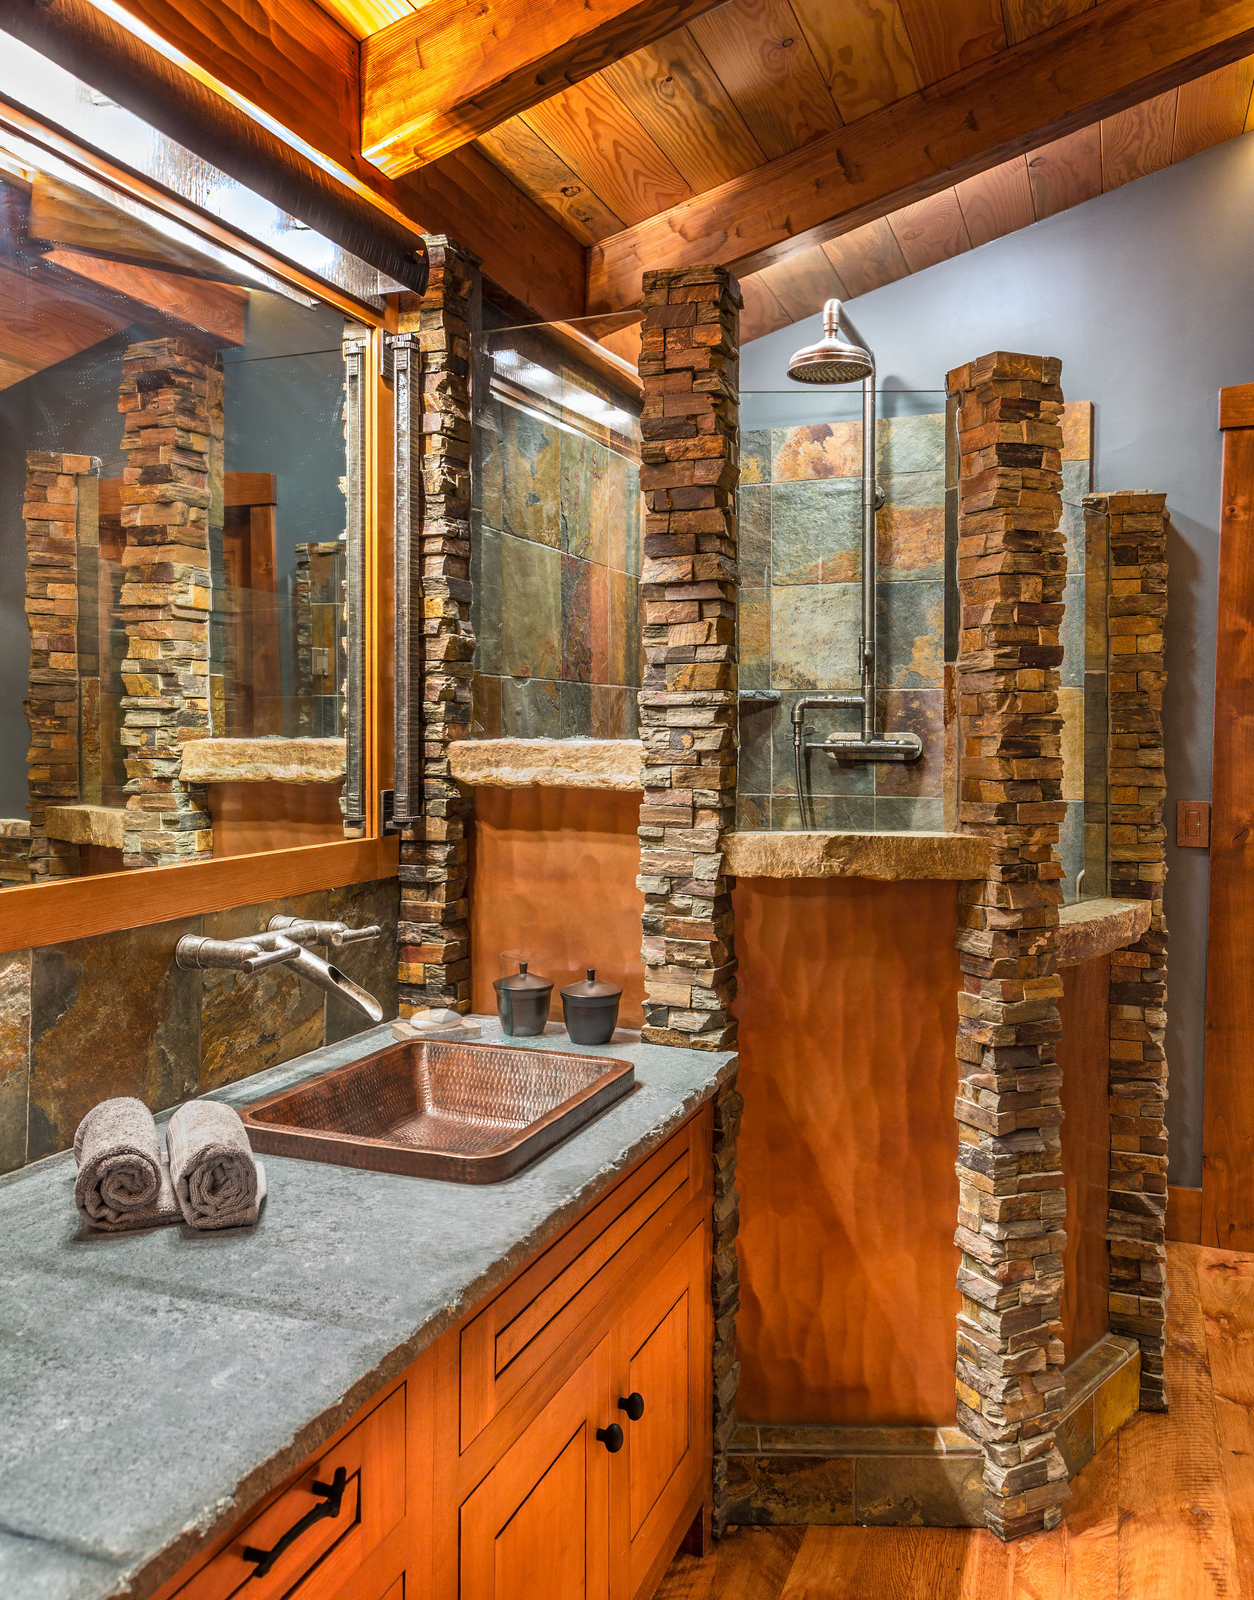 16 Fantastic Rustic Bathroom Designs That Will Take Your